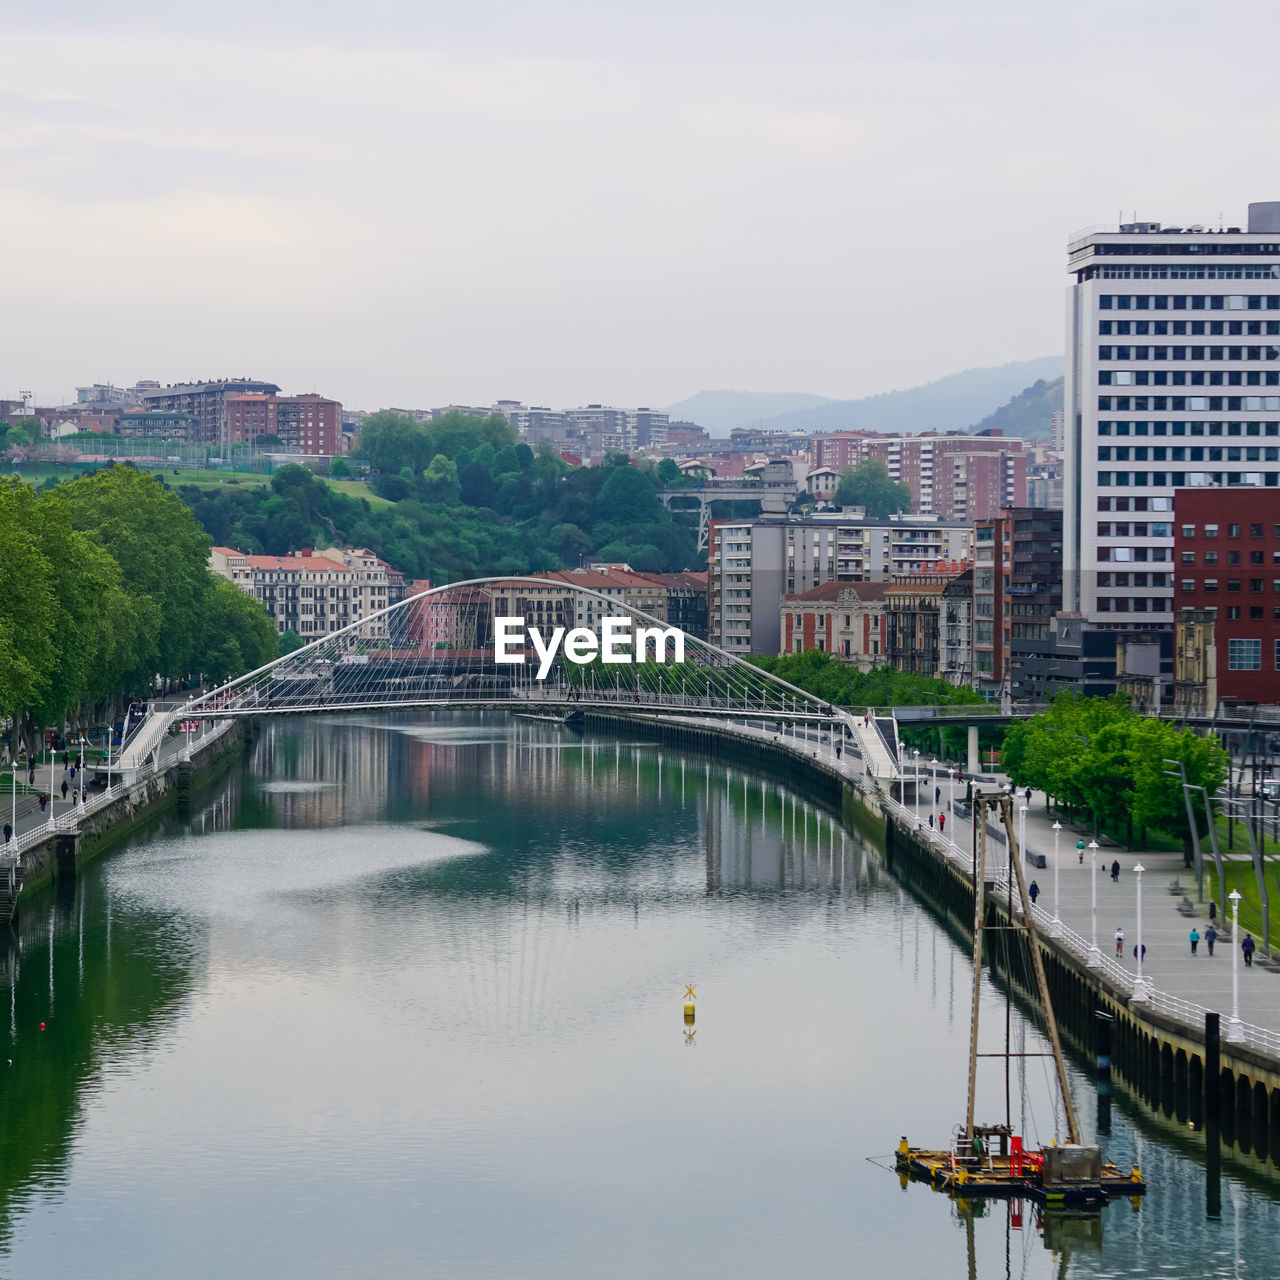 City view from bilbao city, basque country, spain, travel destinations